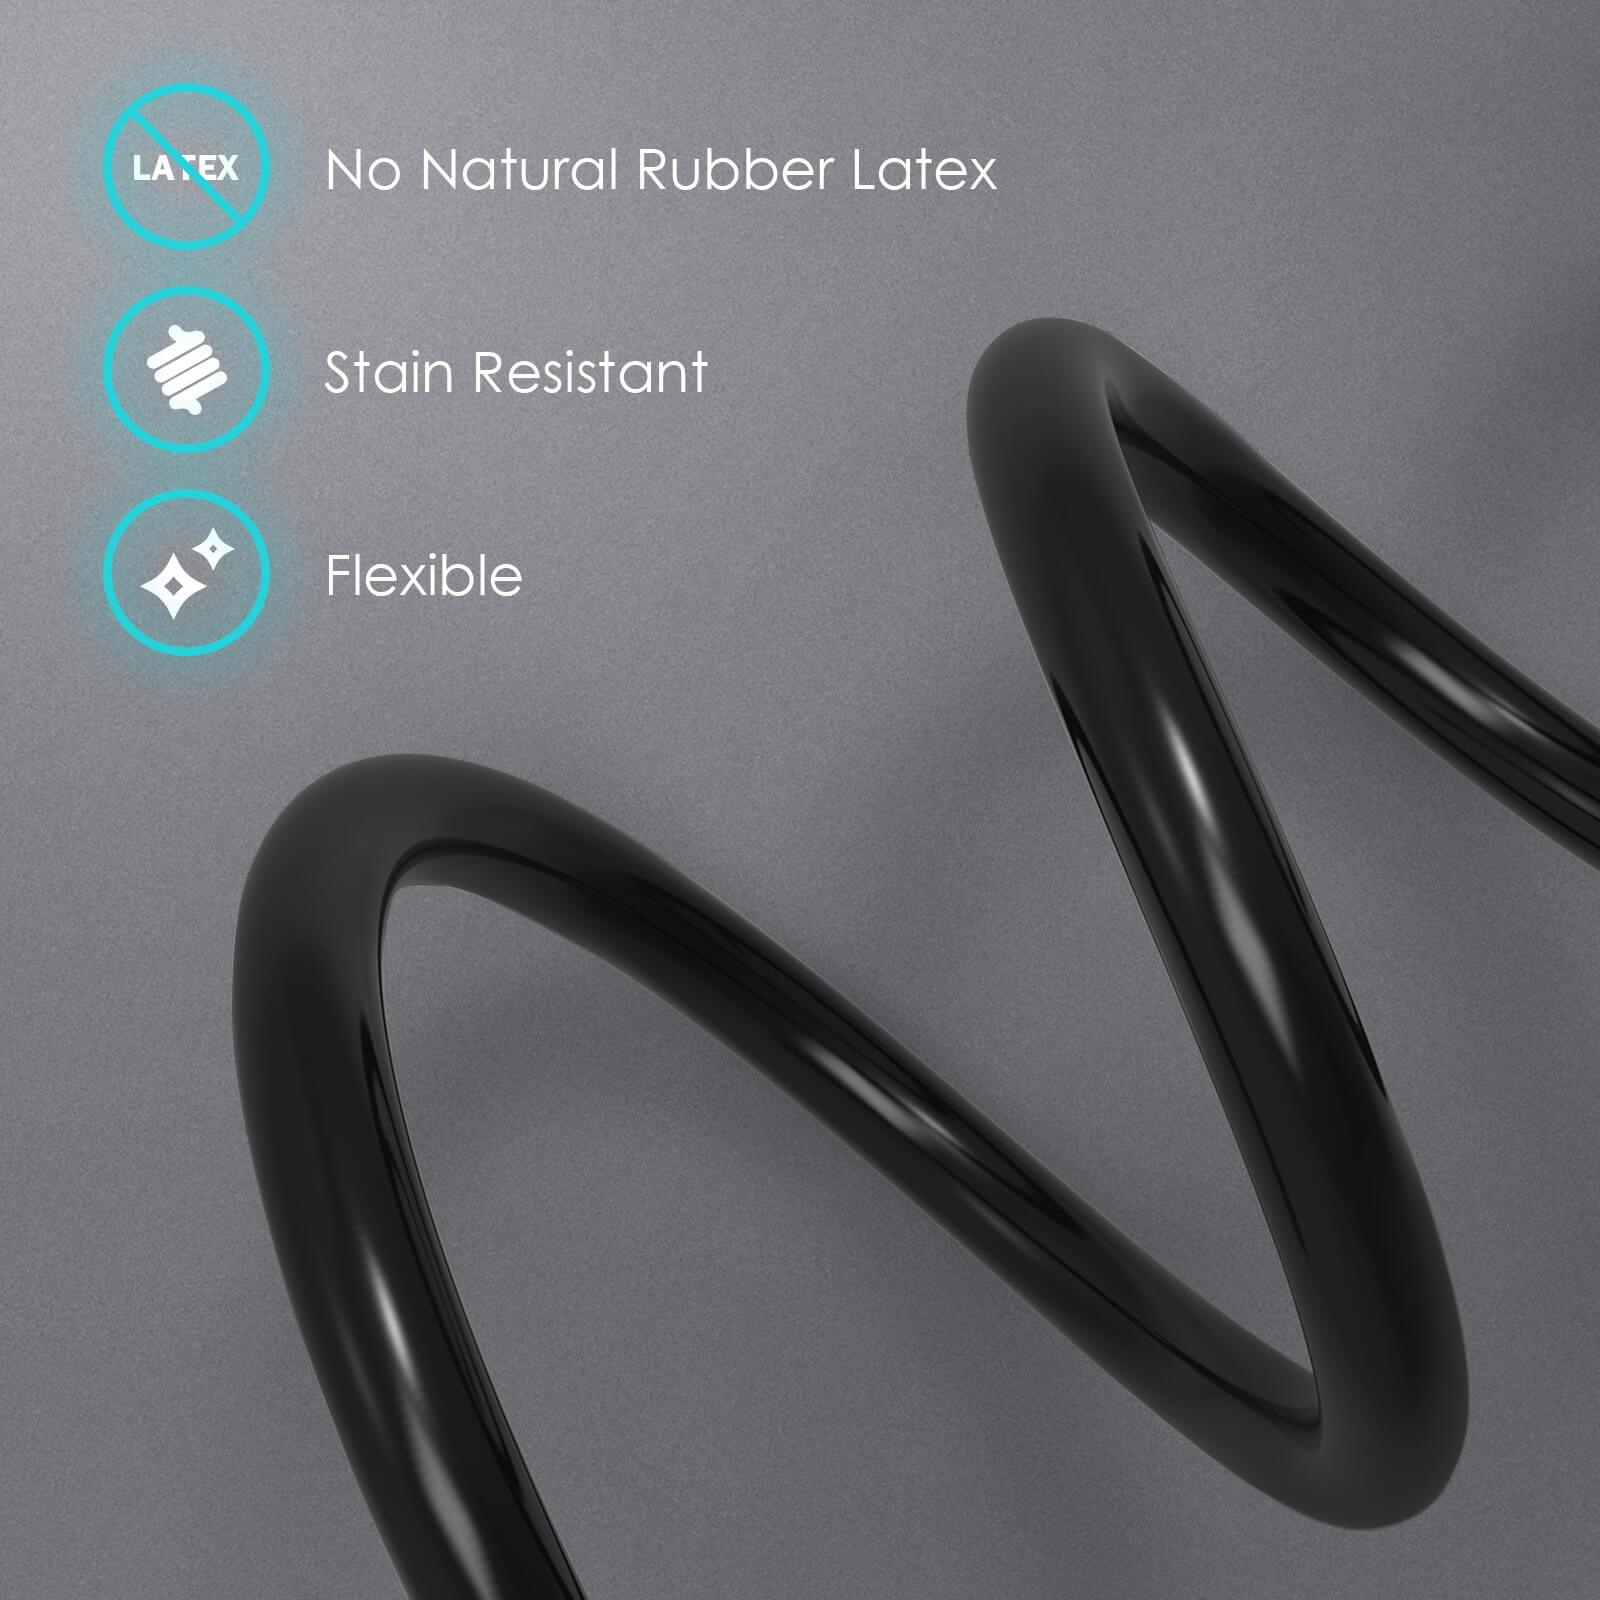 no natural rubber latex, stain resistant, flexible